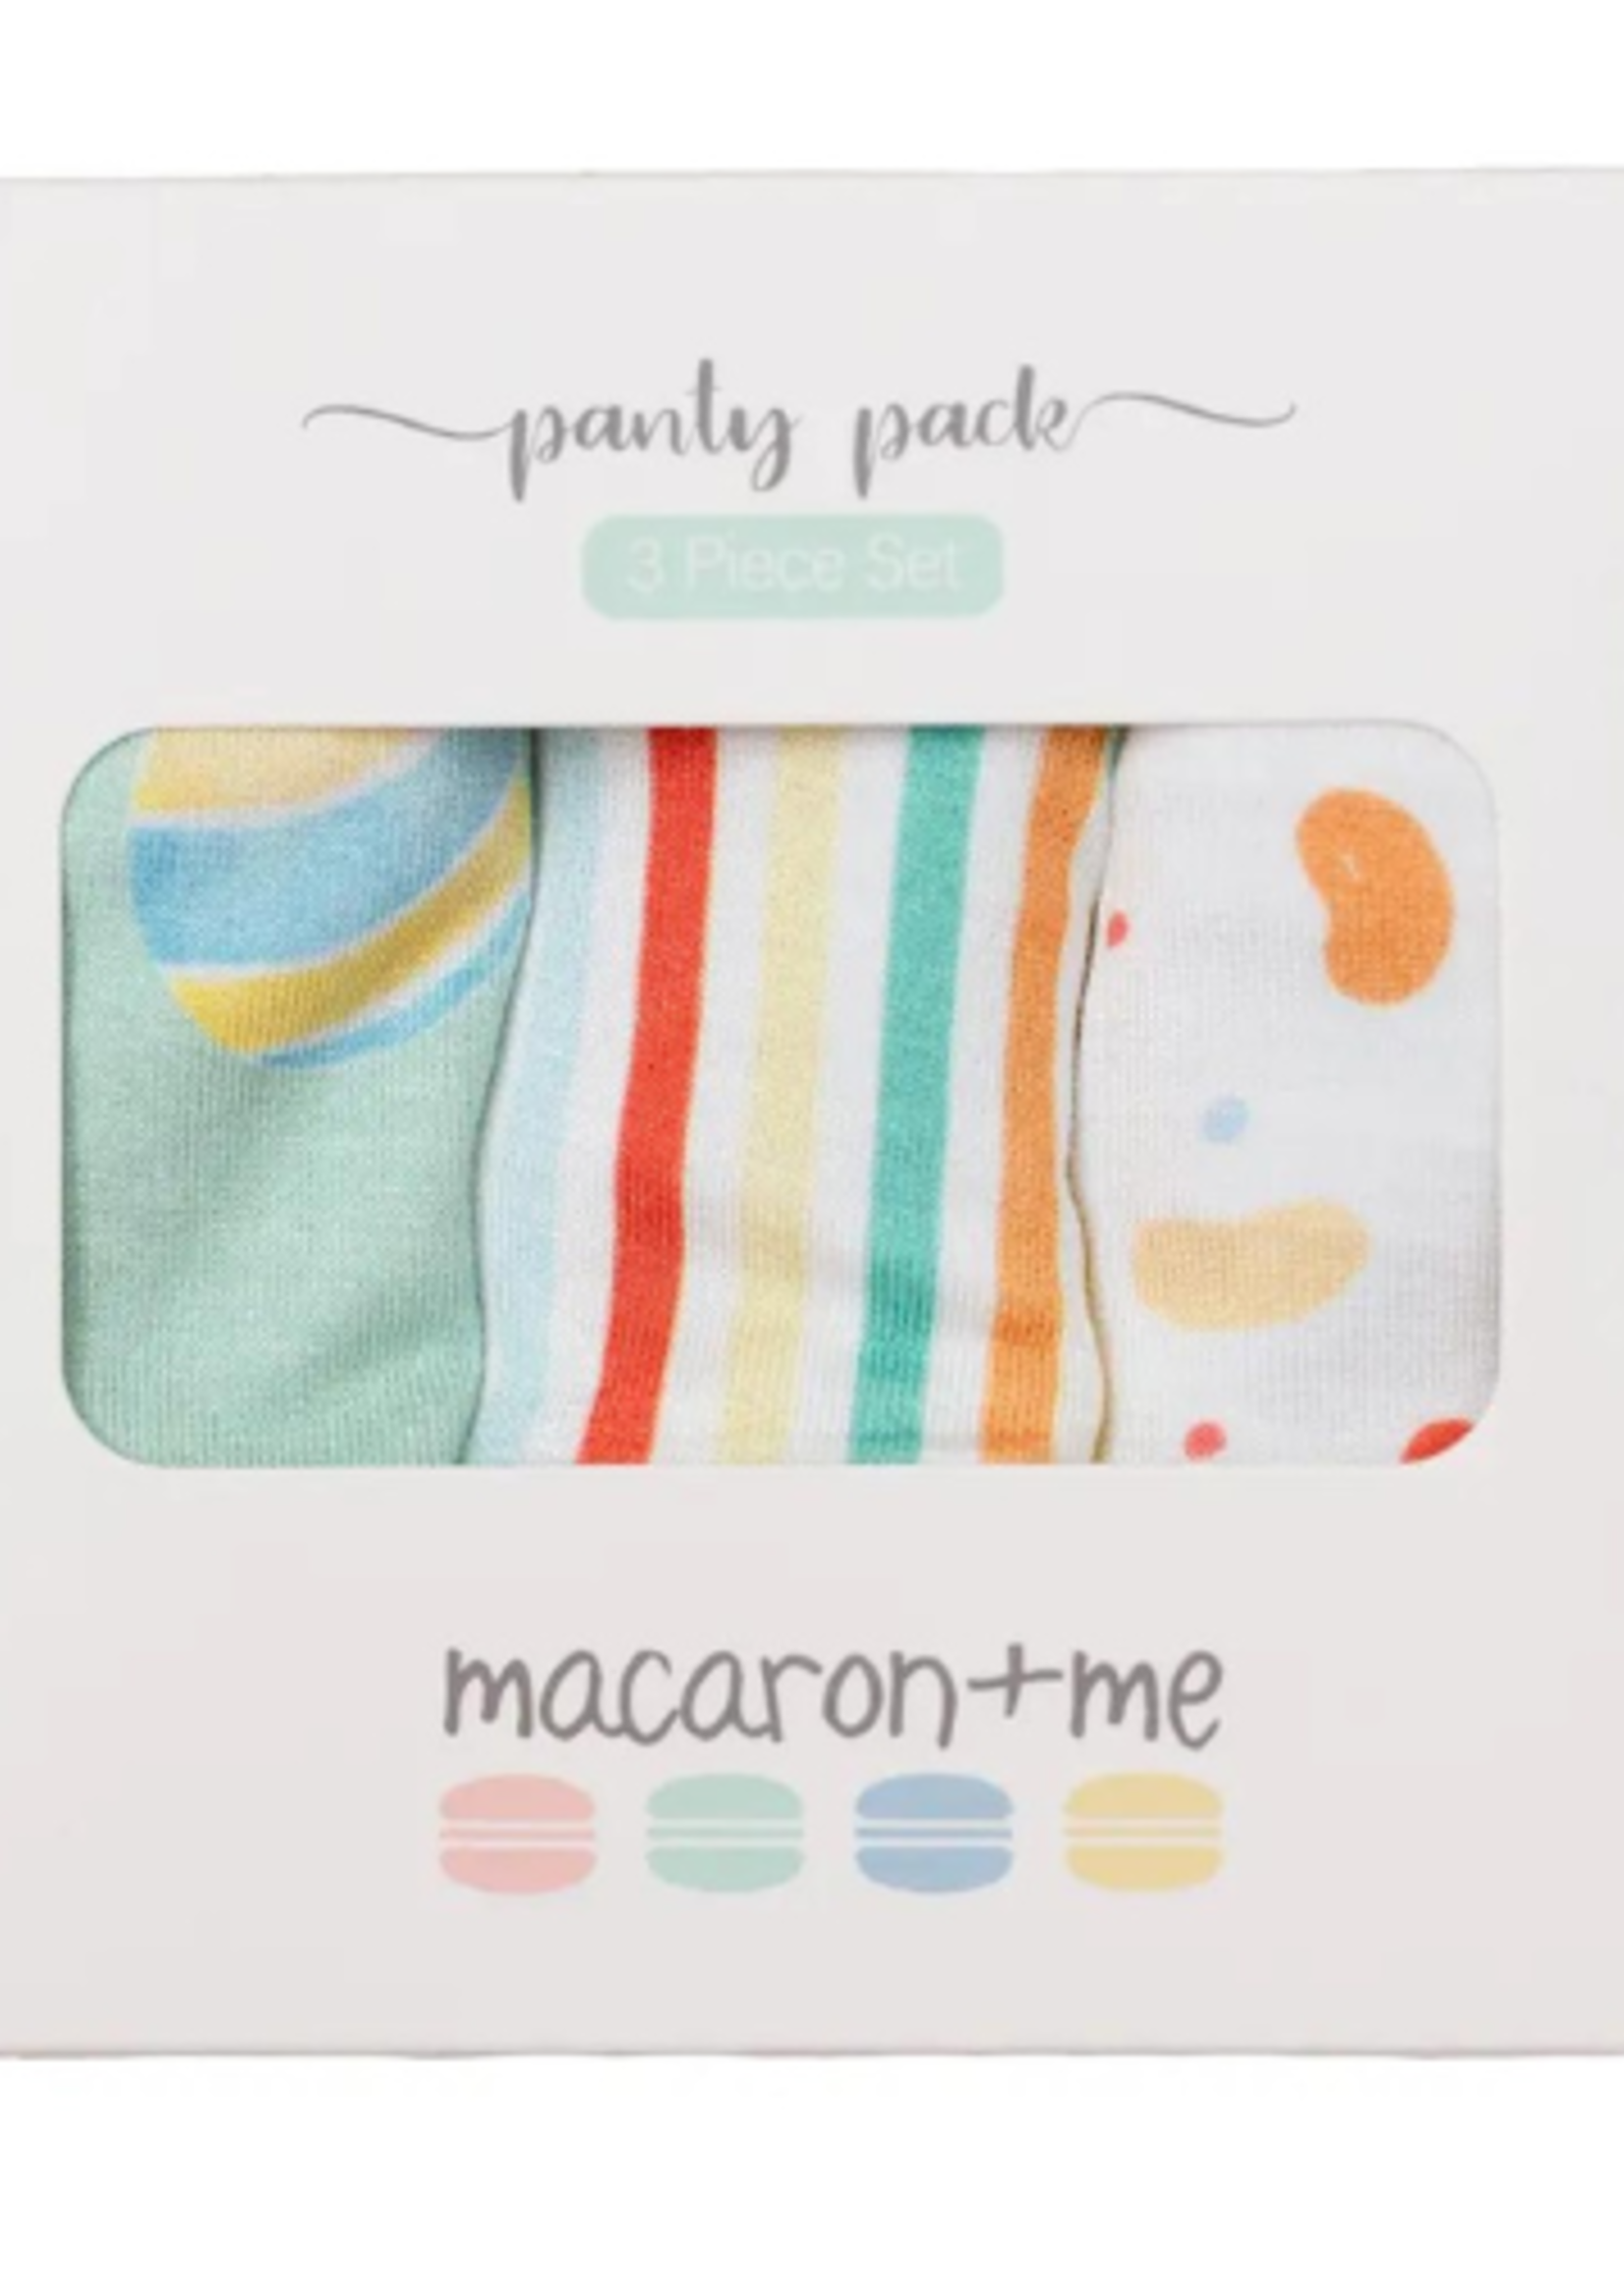 Macaron + Me Easter Eggs & Jelly Bean Stripes Panty Pack